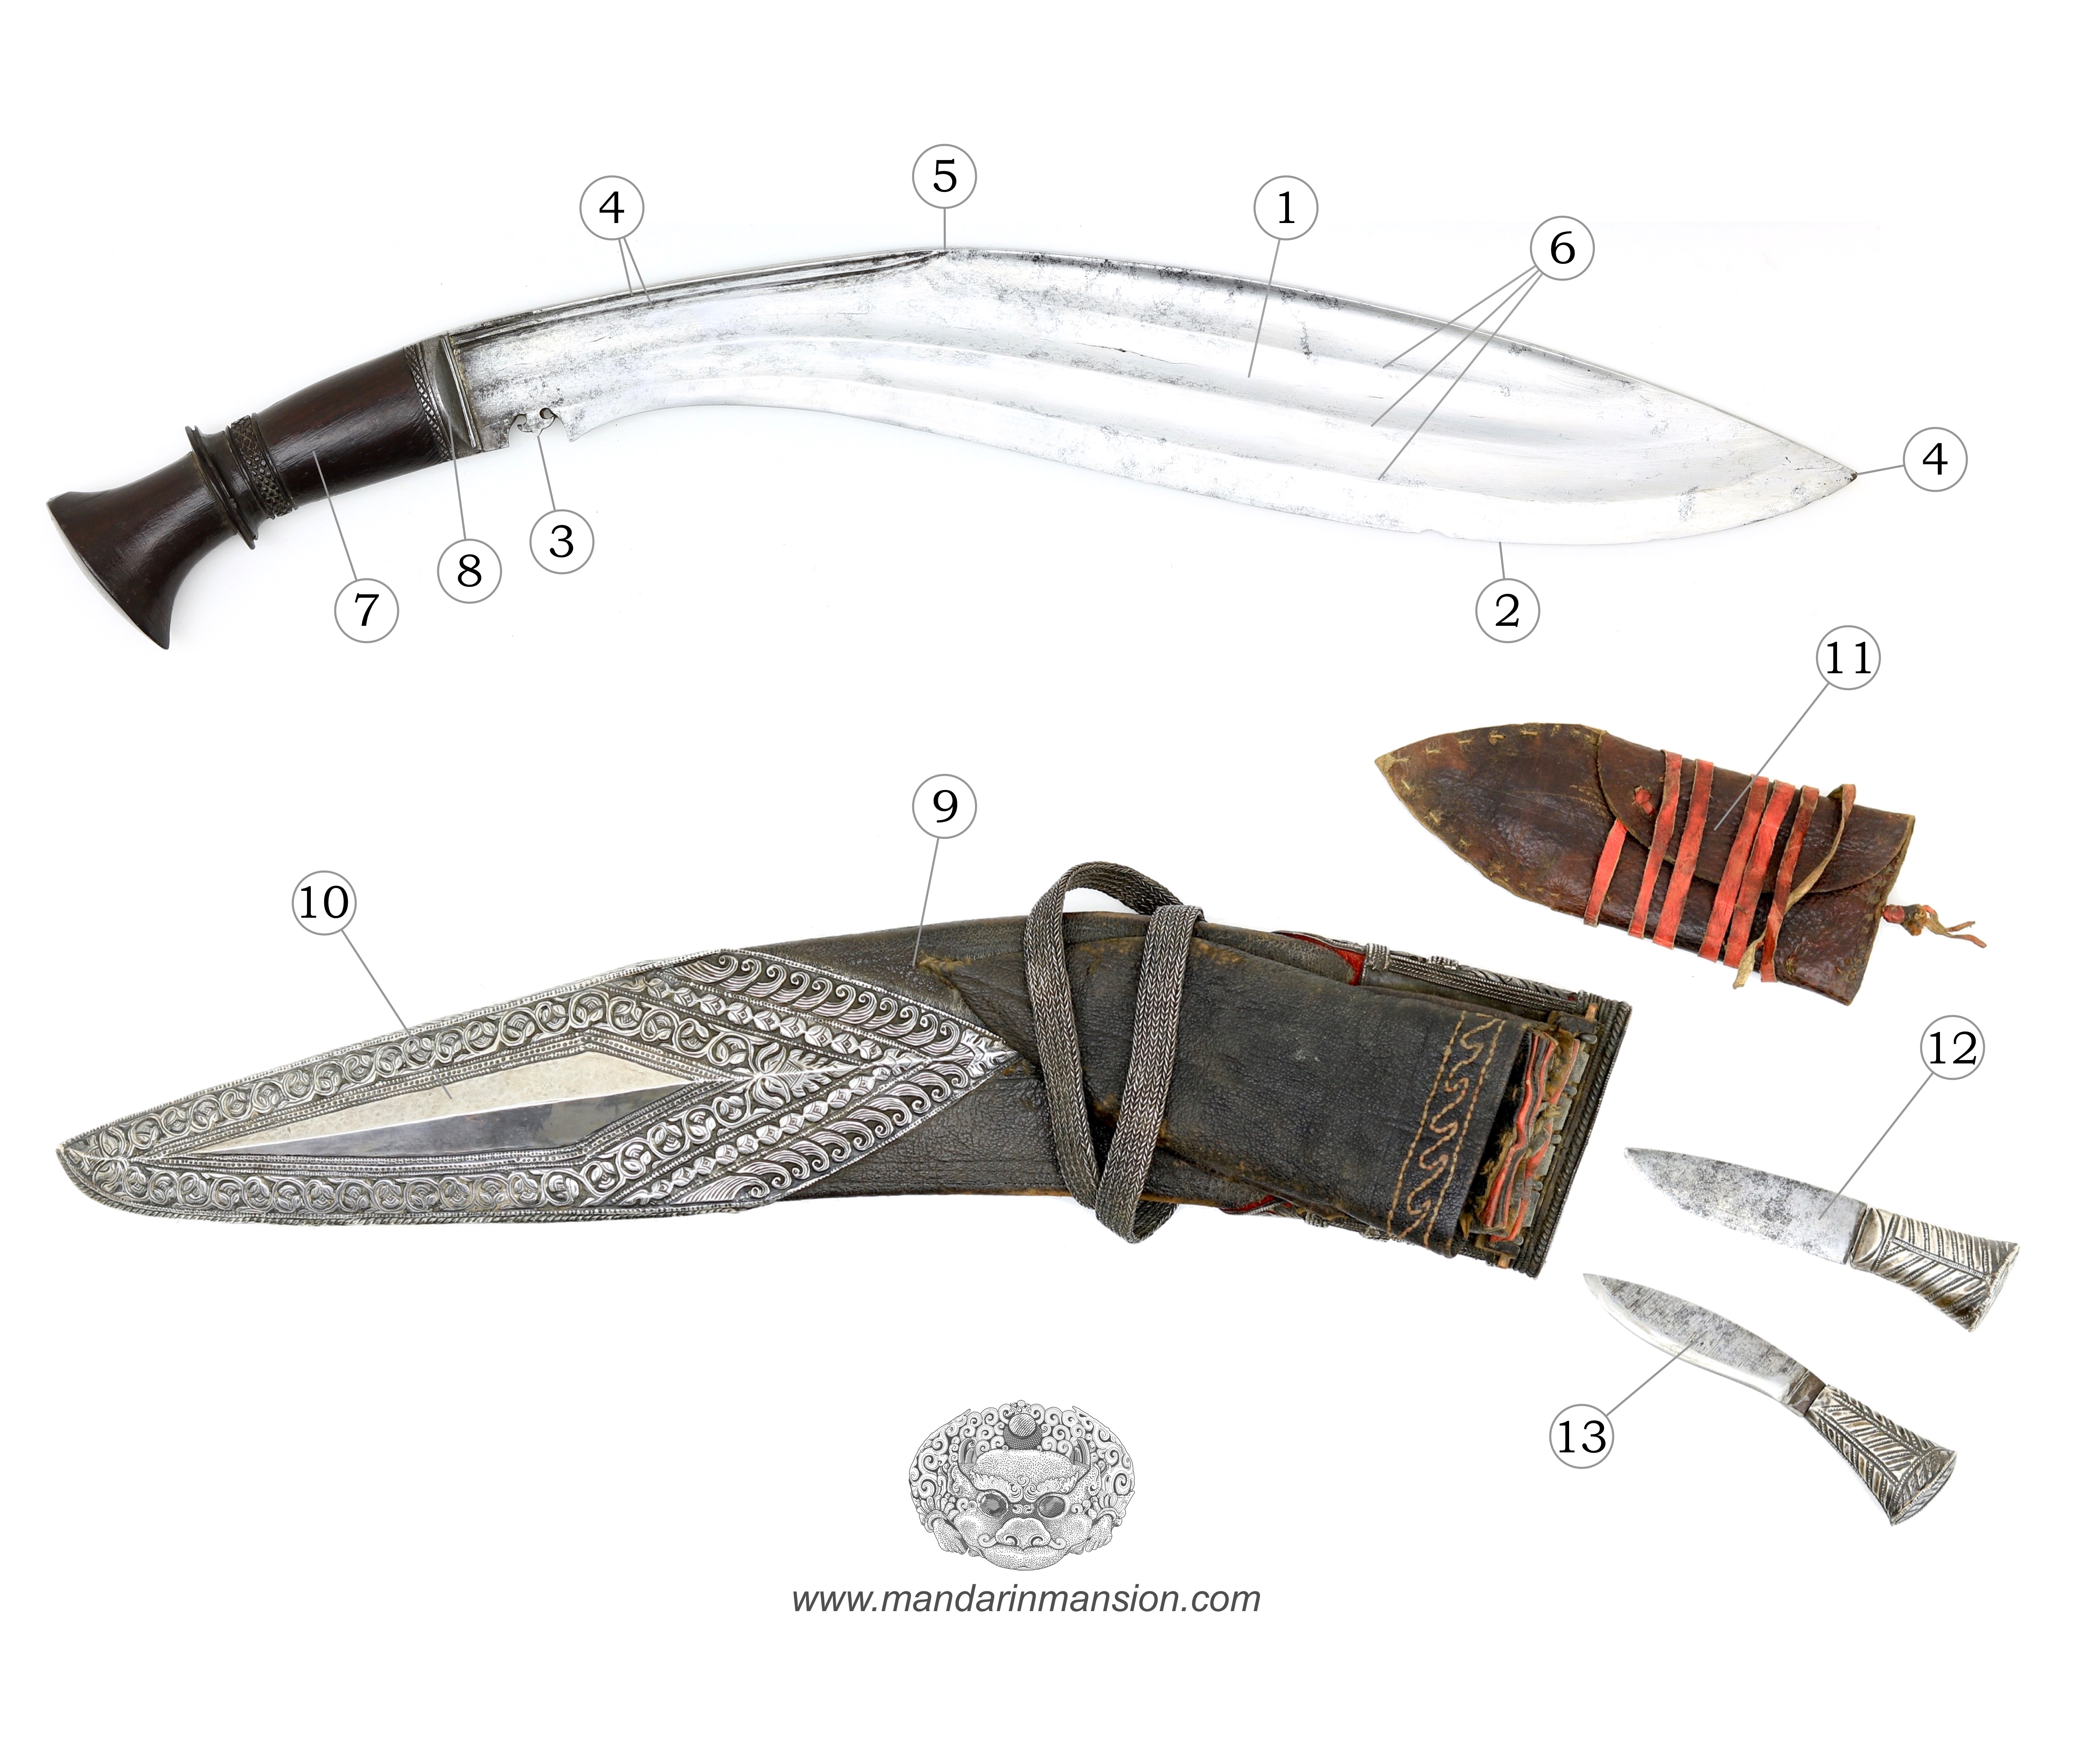 Overview of khukri parts